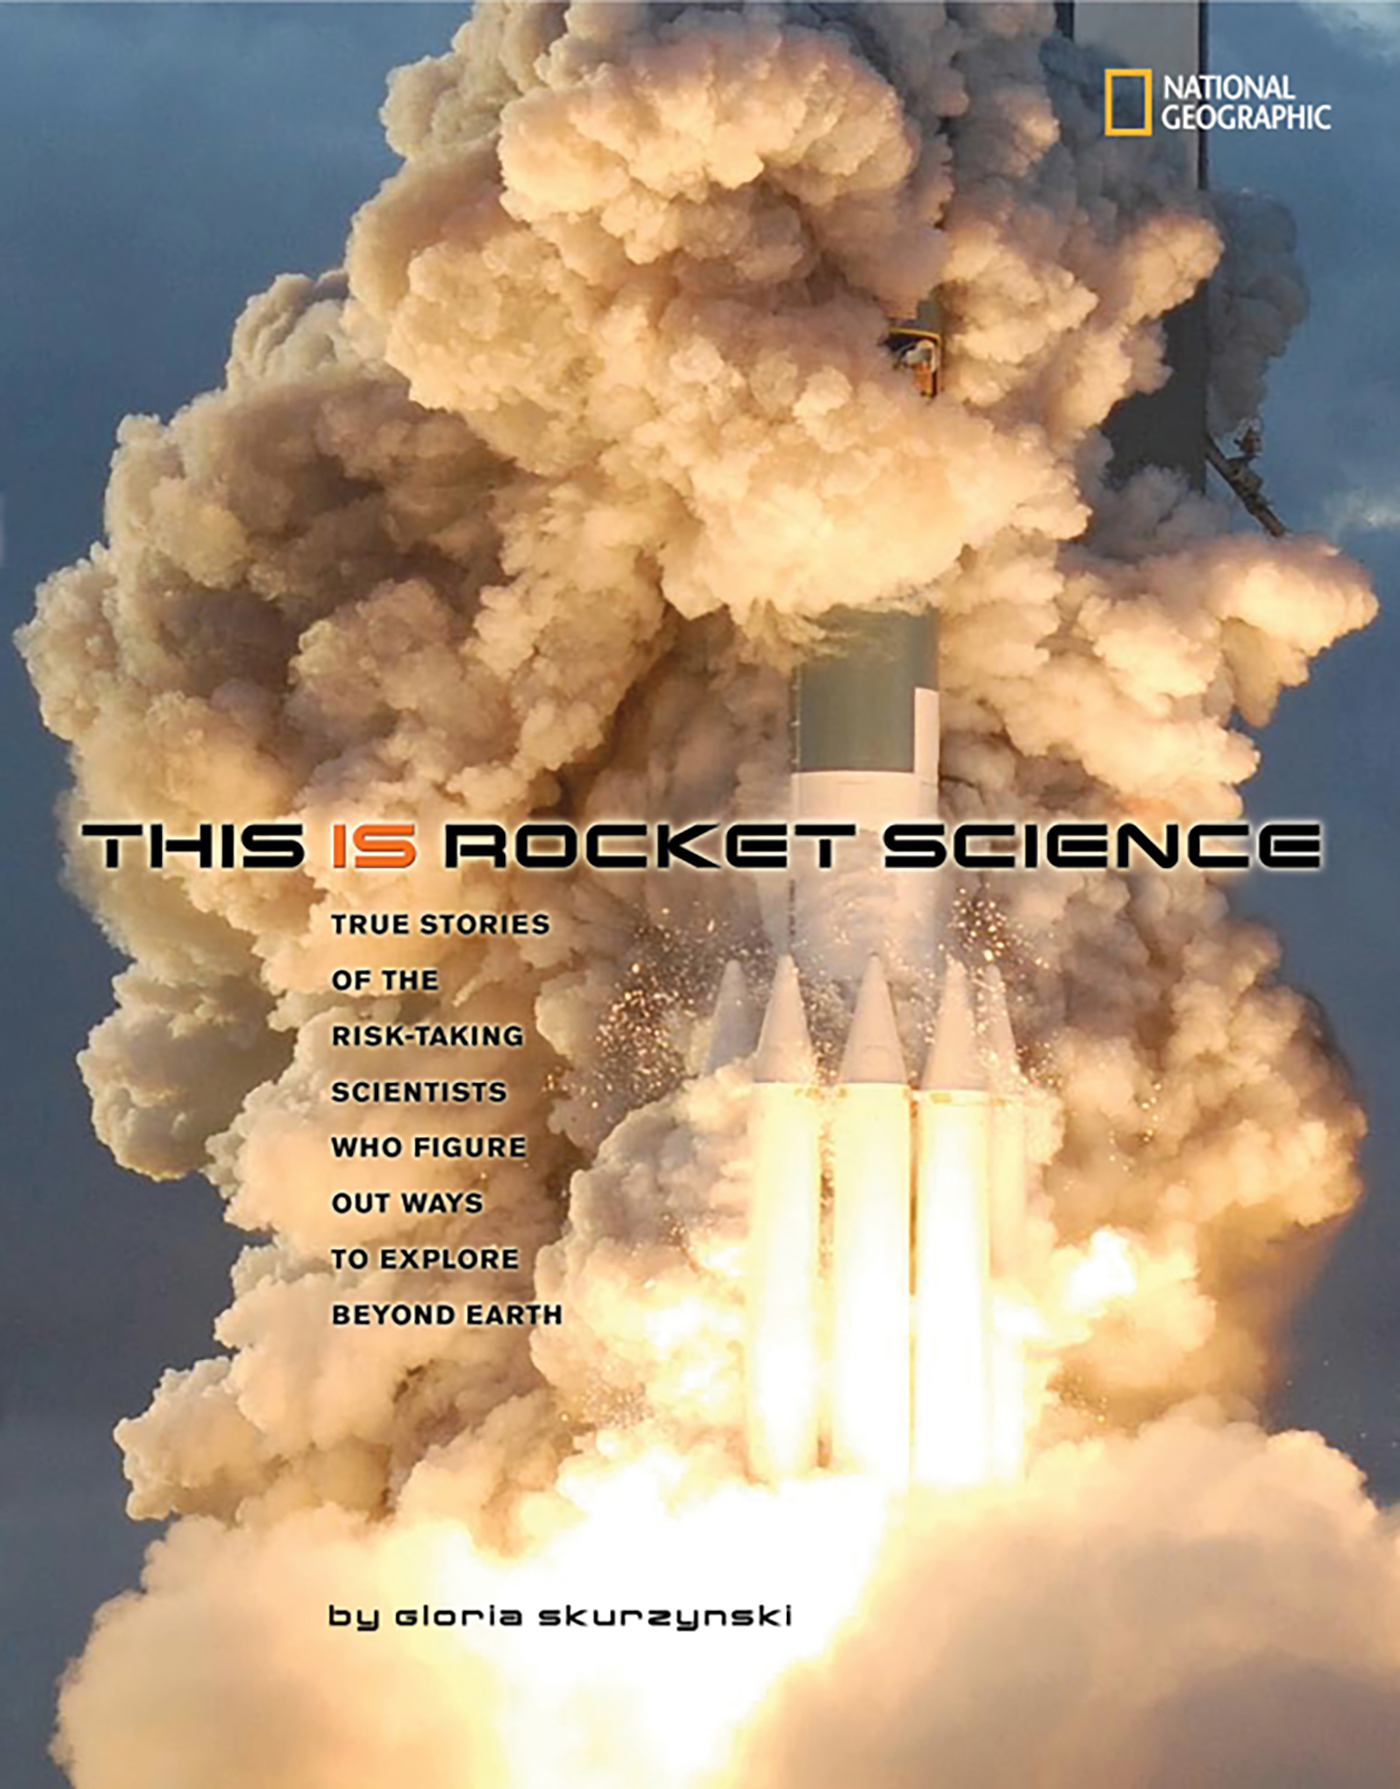 This is rocket science true stories of the risk-taking scientists who figured out ways to explore beyond Earth cover image